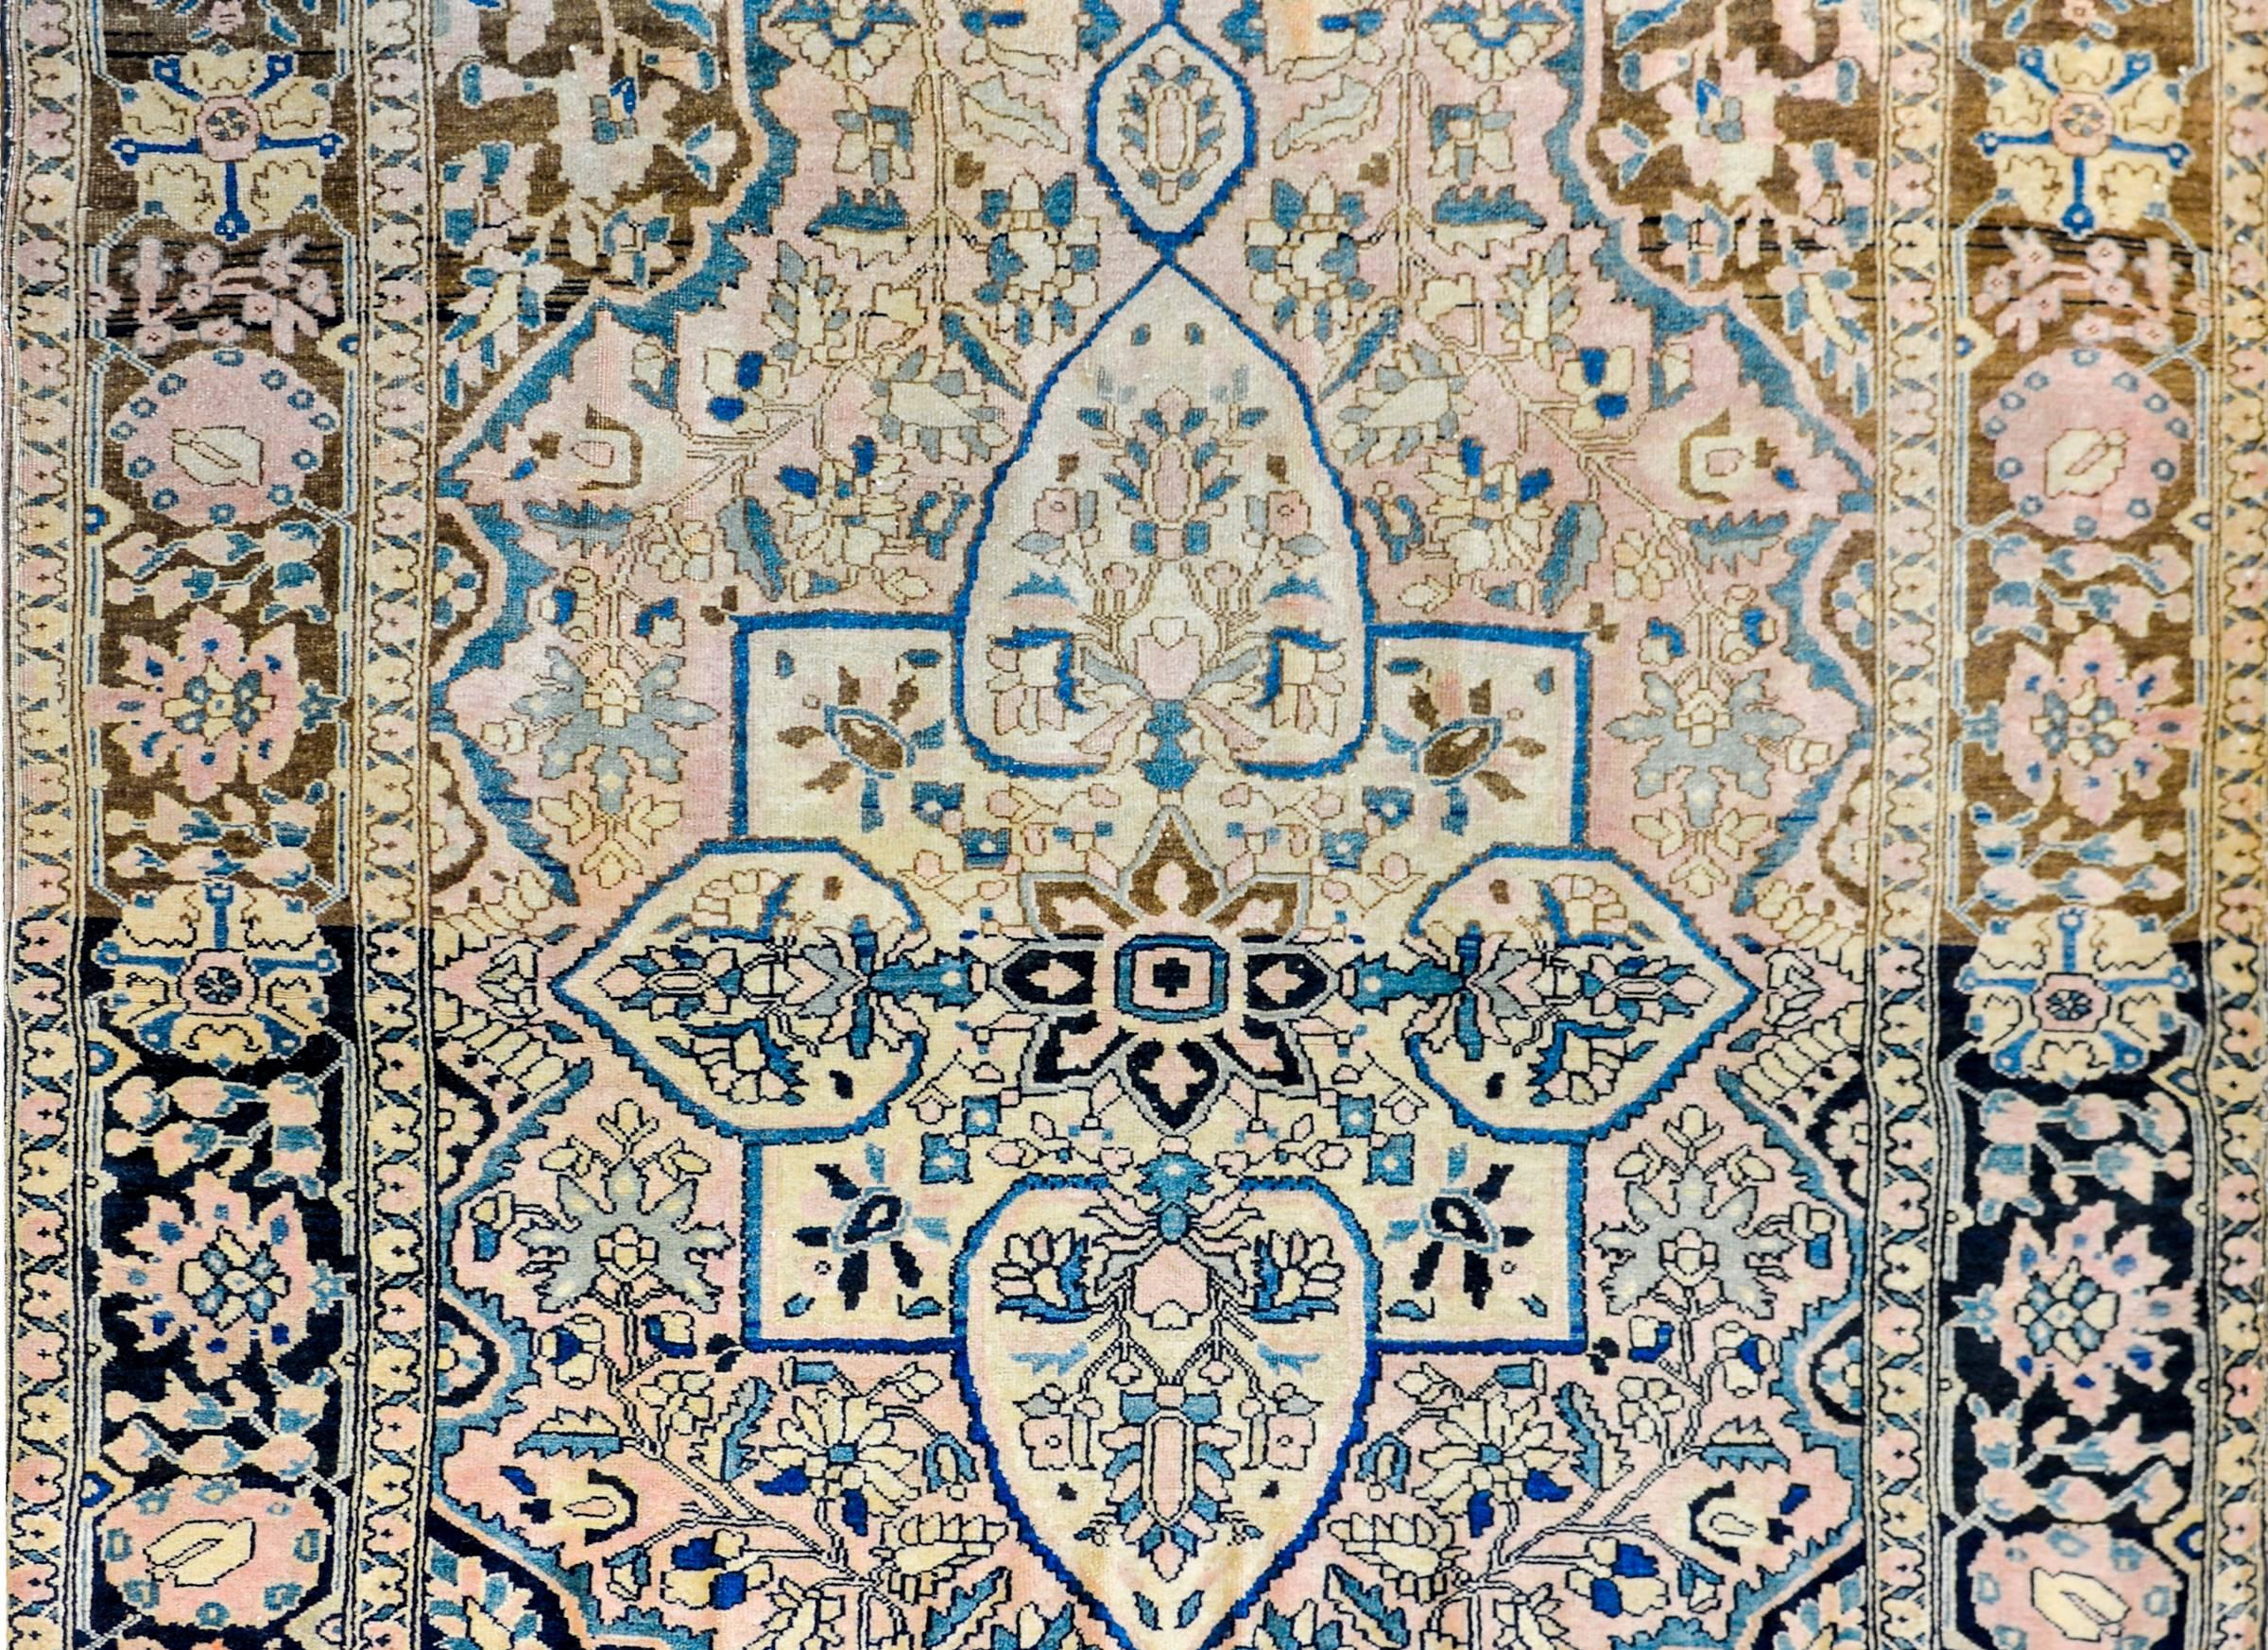 An amazing early 20th century Persian Sarouk Farahan rug with wonderfully woven large-scale floral medallion amidst a field of flowers woven in indigo, green, gold, and brown wool, on a natural, undyed, wool background surrounded by an elaborate